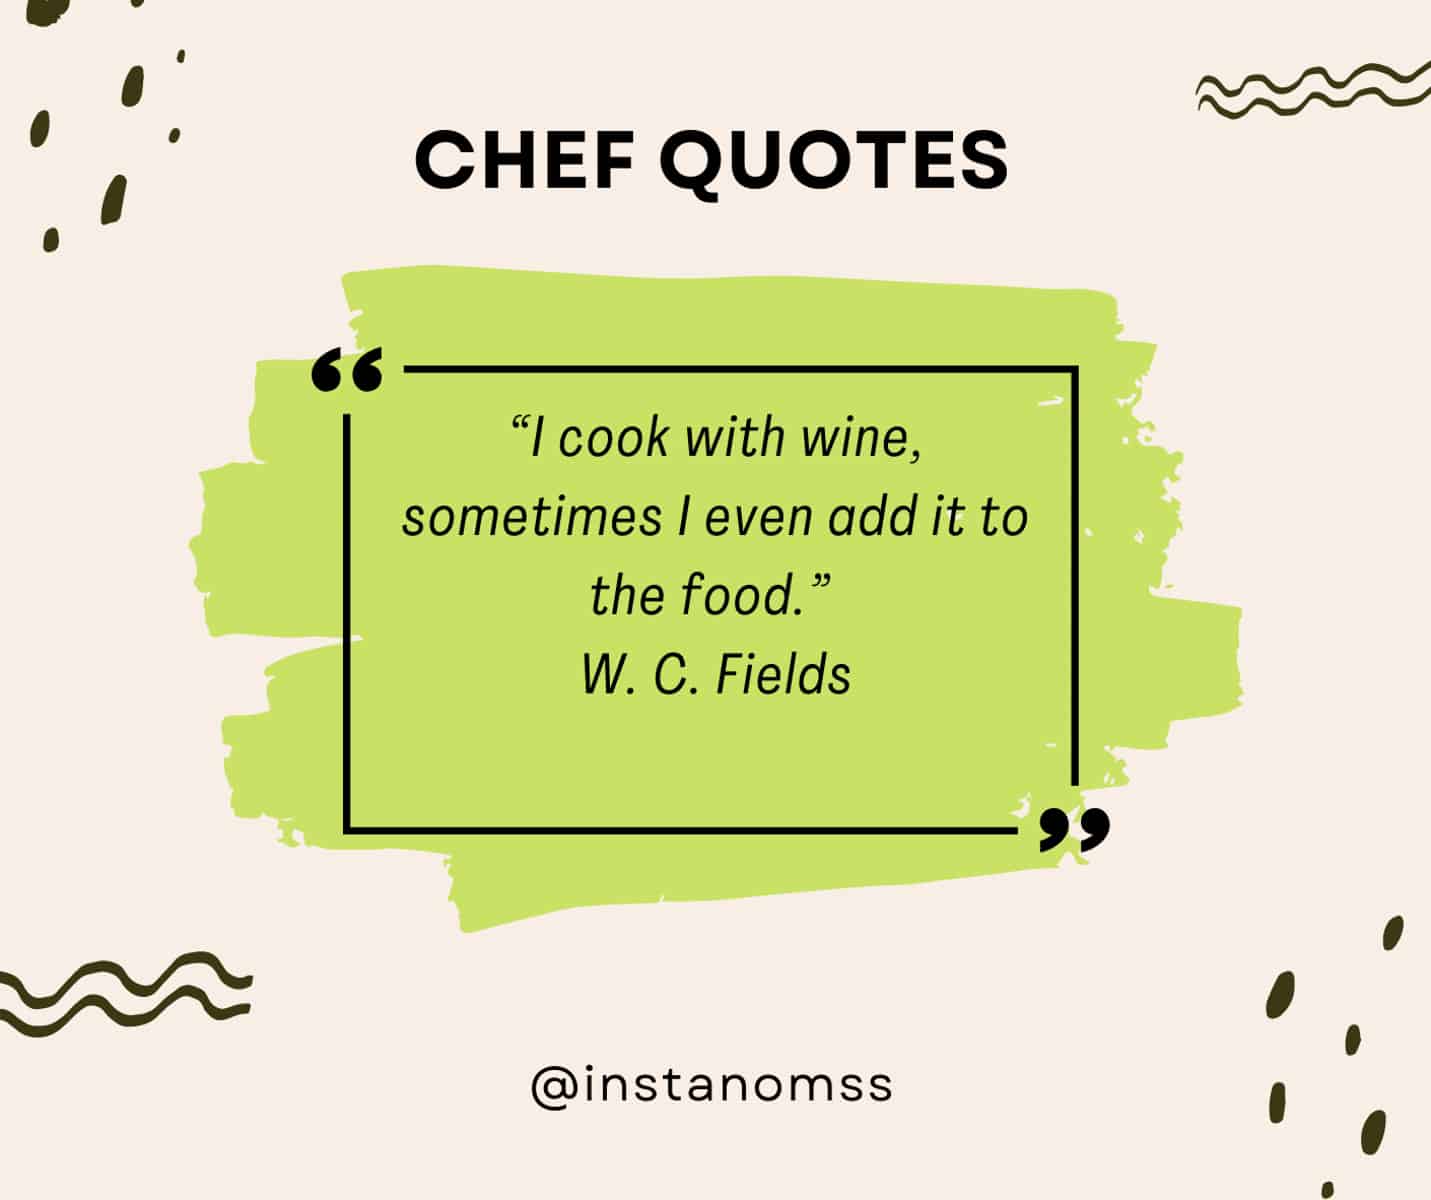 “I cook with wine, sometimes I even add it to the food.” W. C. Fields